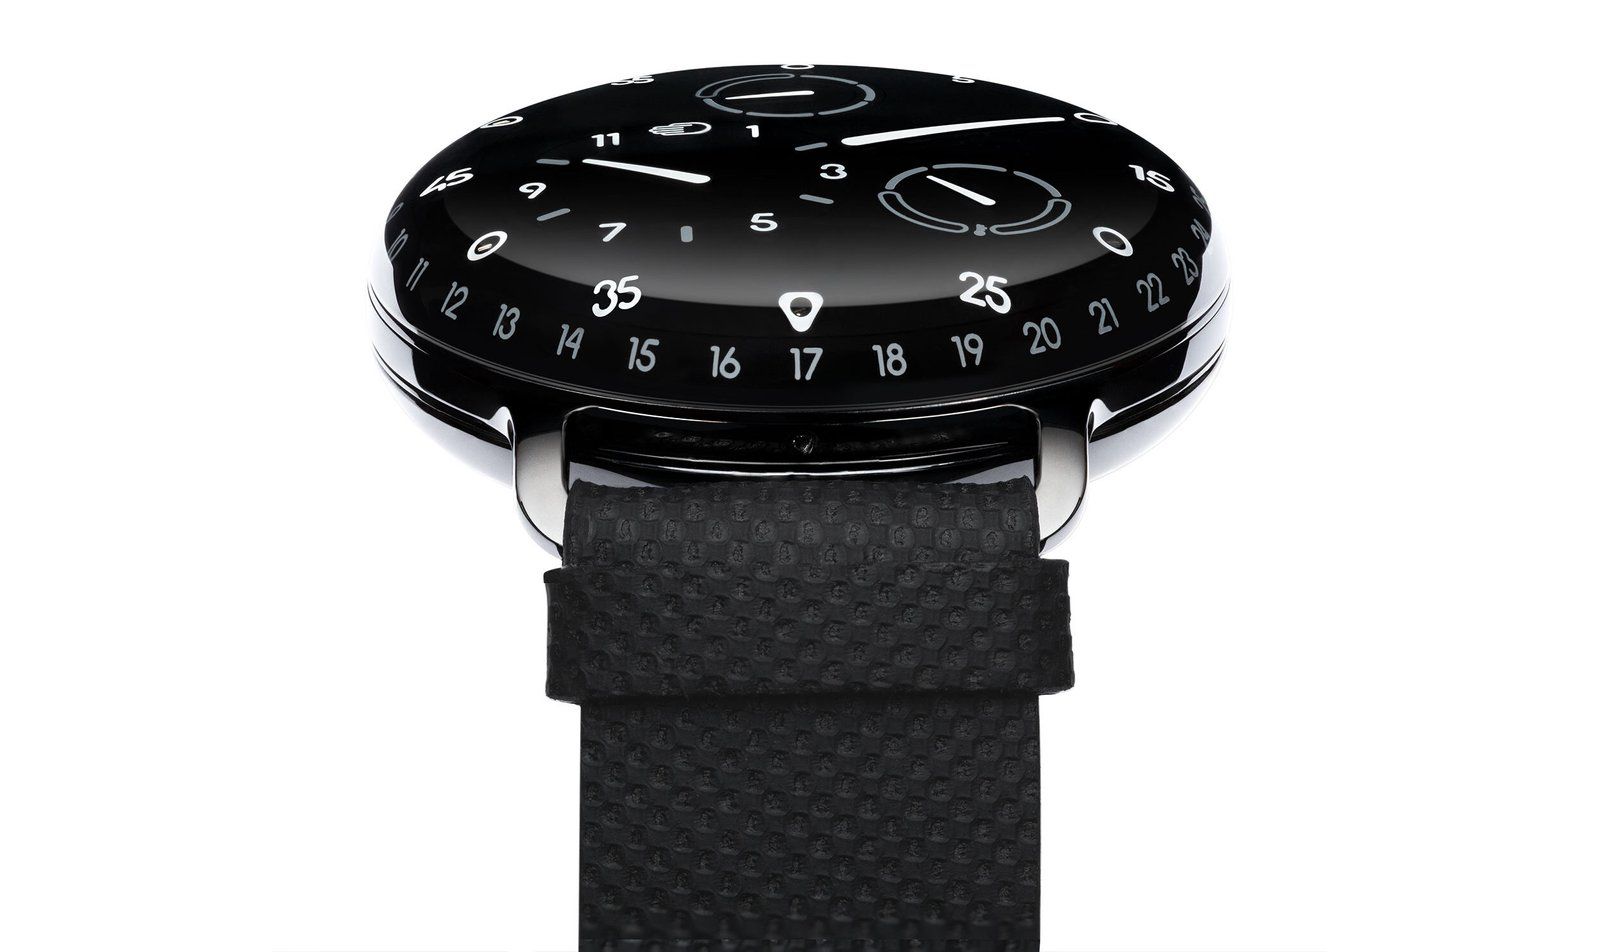 Ressence The Oil-Filled Mechanical Watch - Type 3 BBB